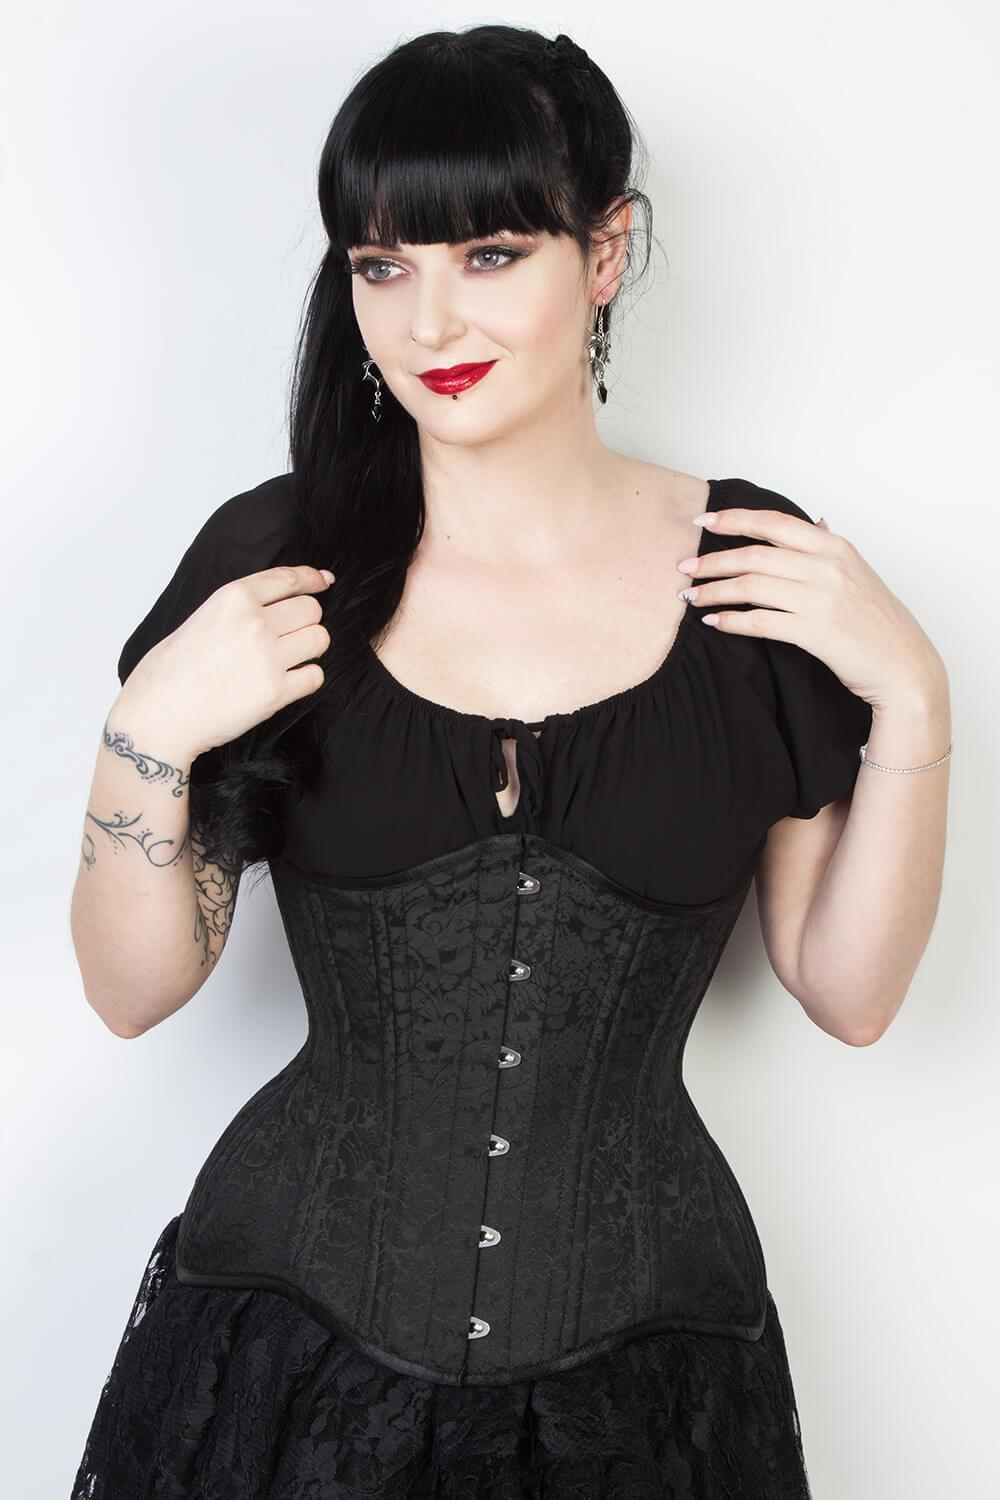 3 Corsets for Just $99 , Waist training Corsets Sale